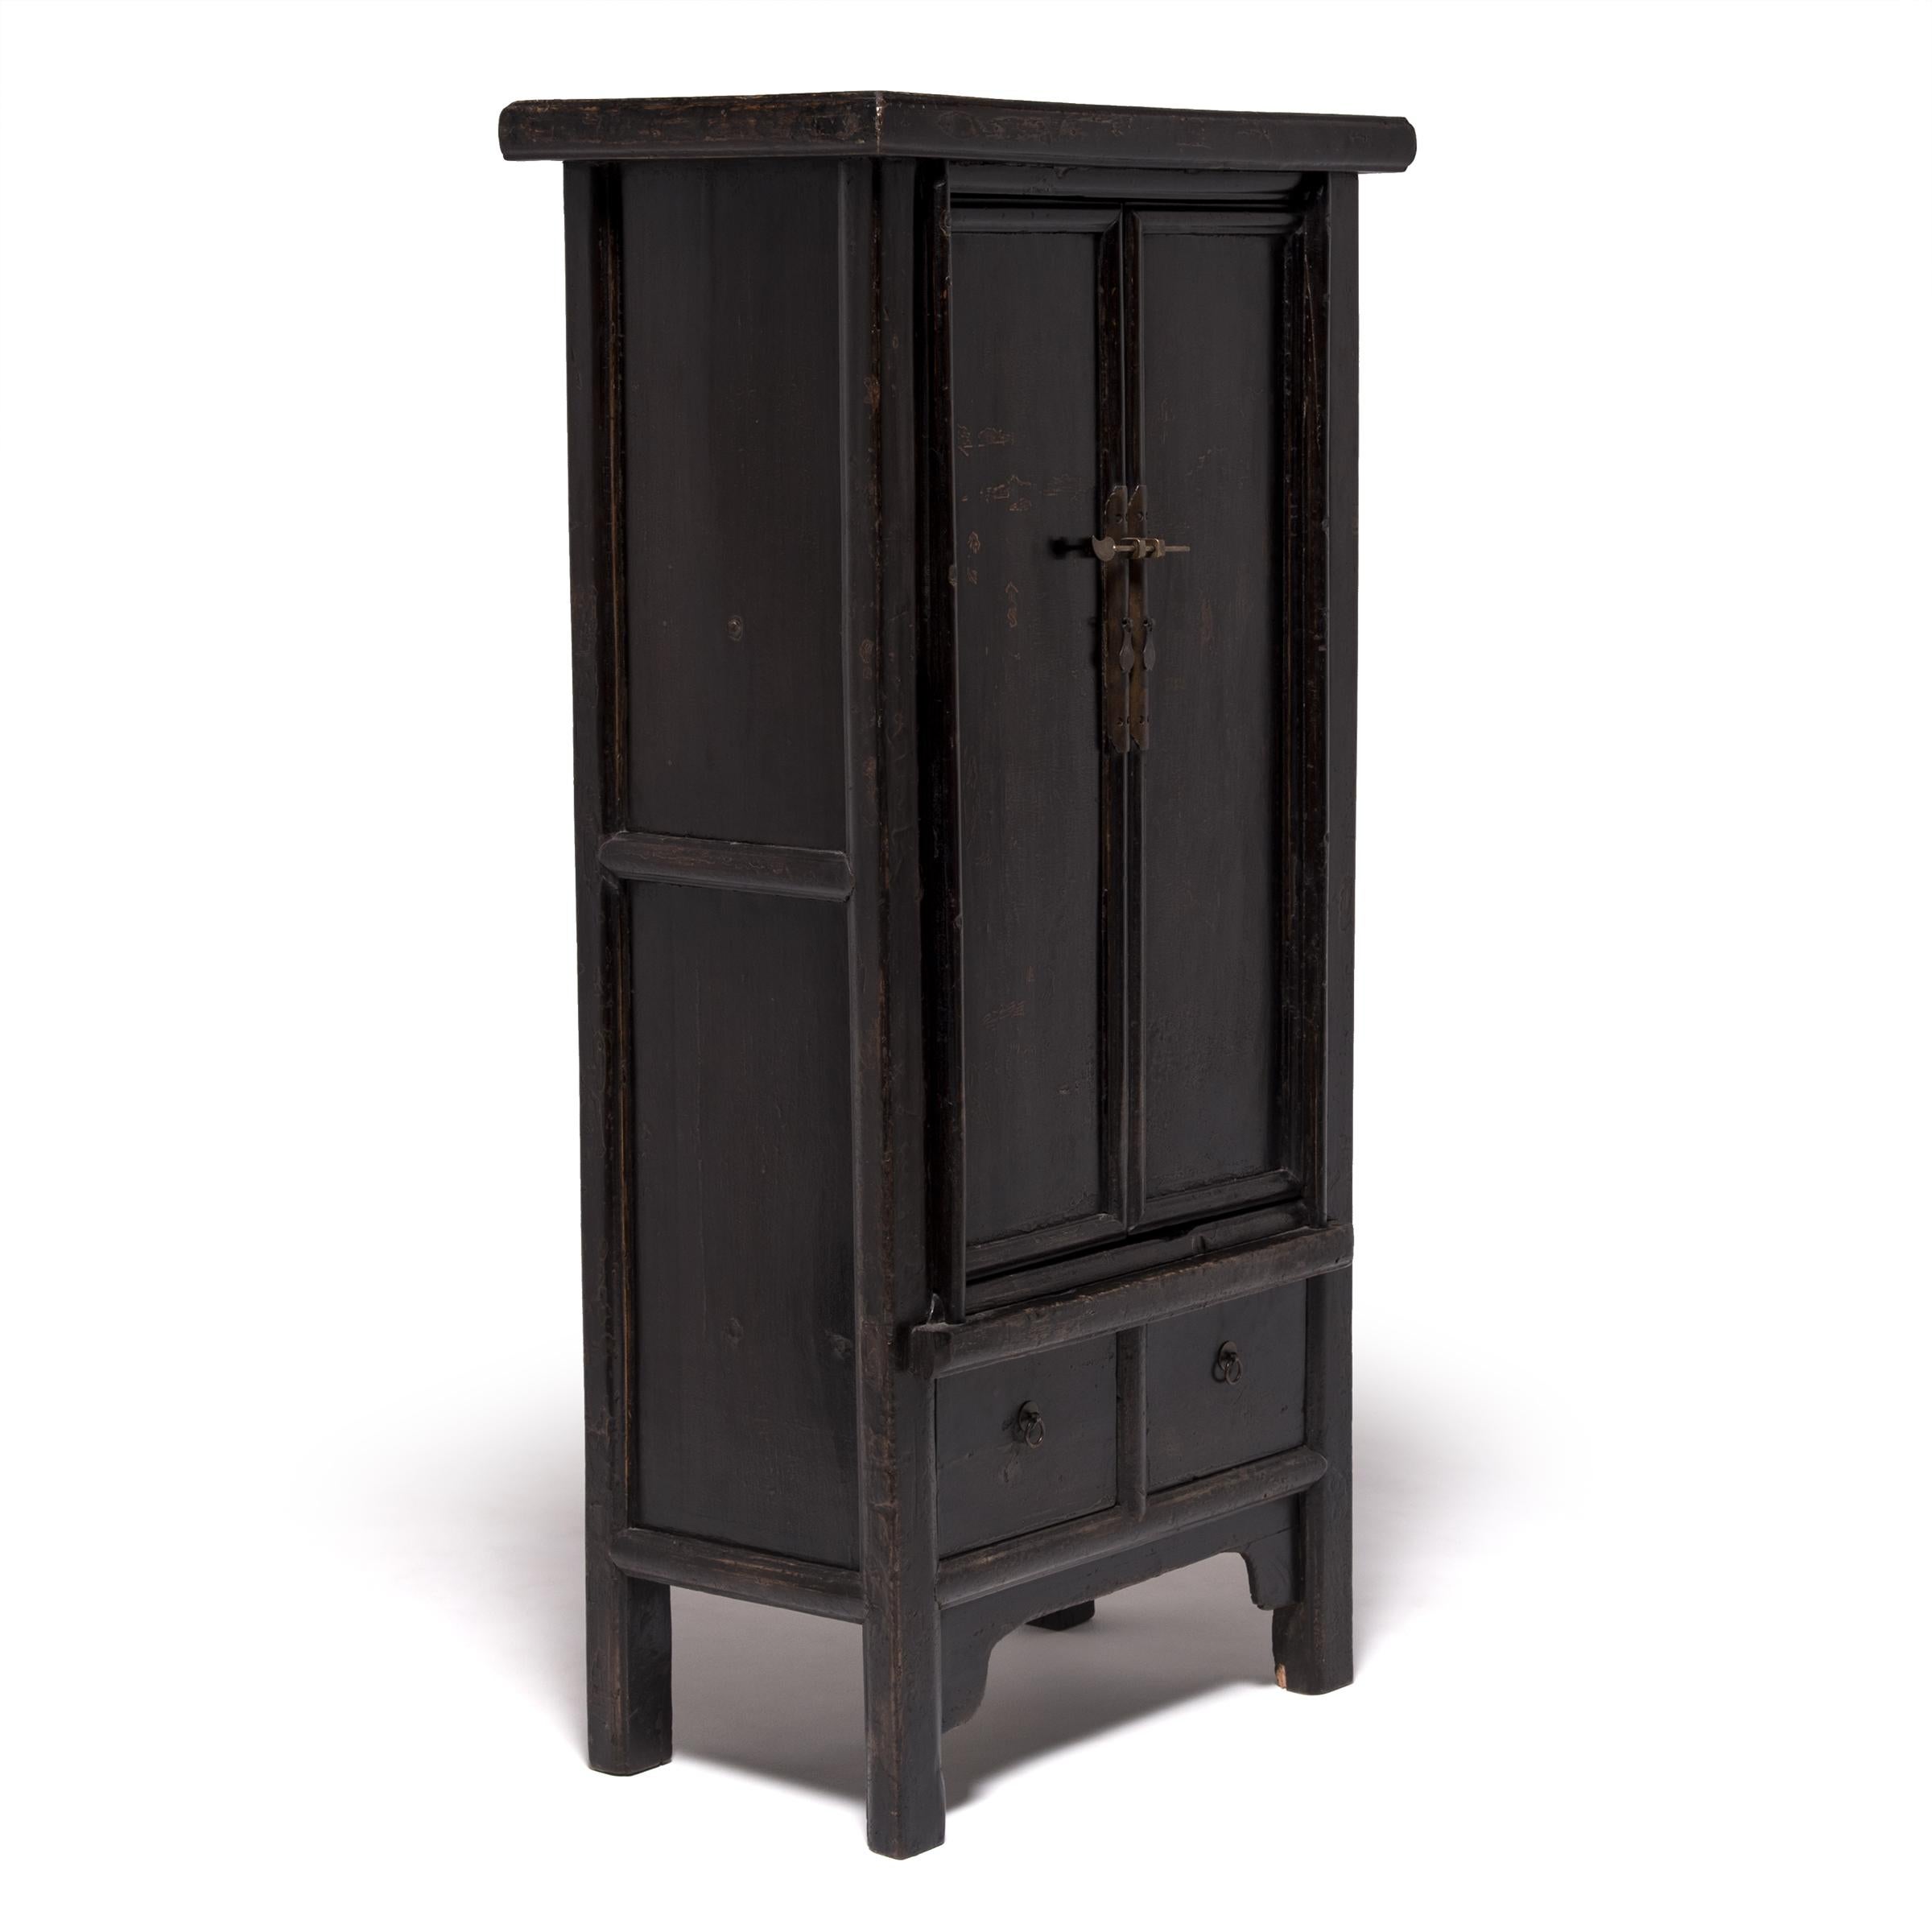 Lacquered Chinese Black Lacquer Noodle Cabinet, c. 1850